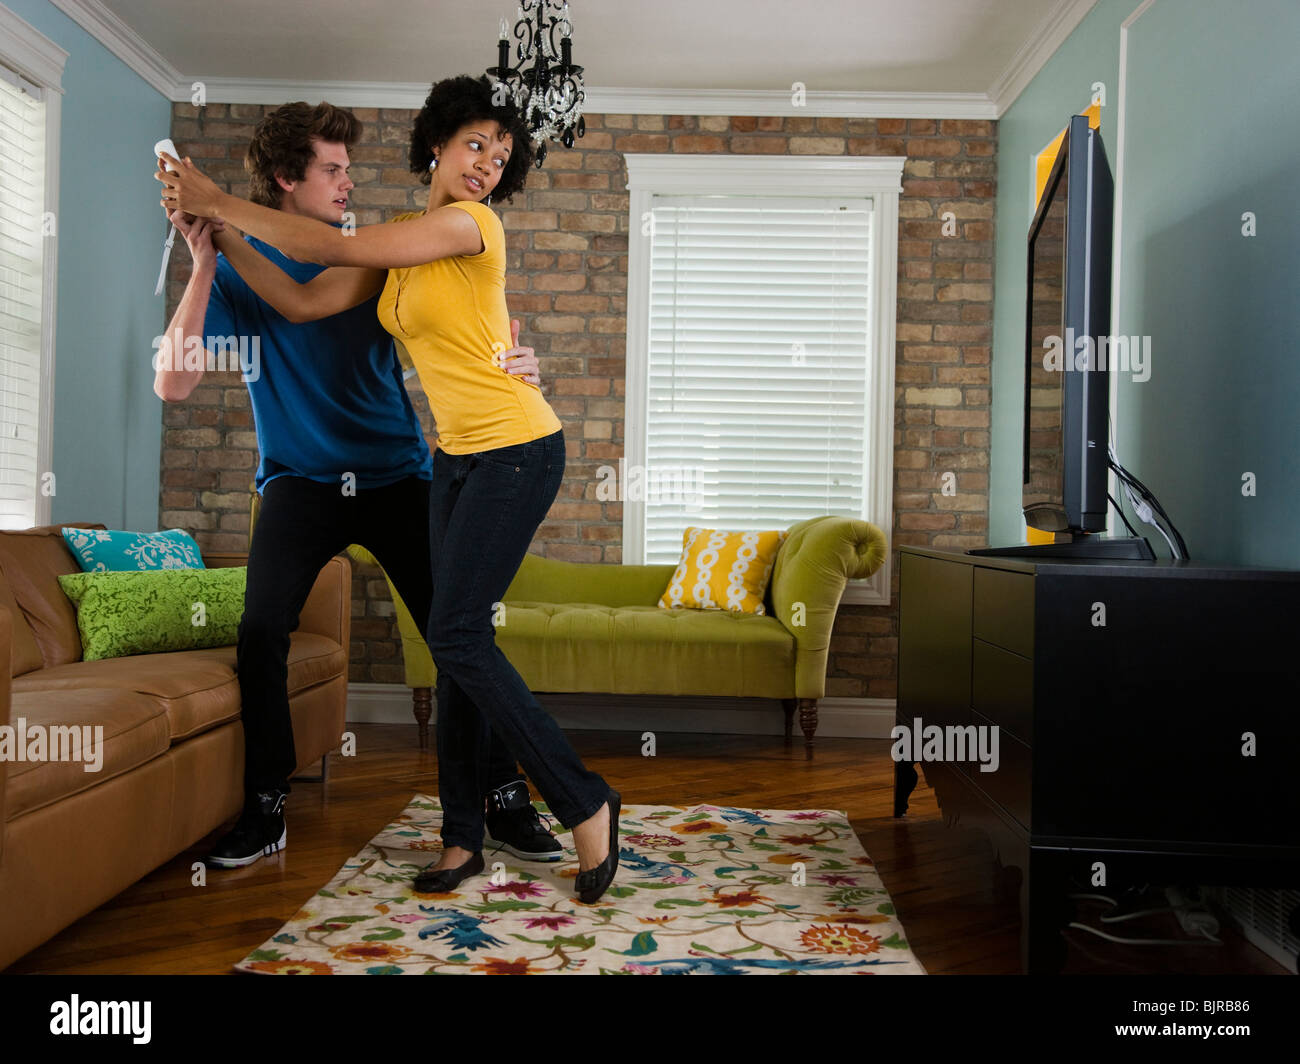 USA, Utah, Provo, young couple holding remote control in living room Stock Photo